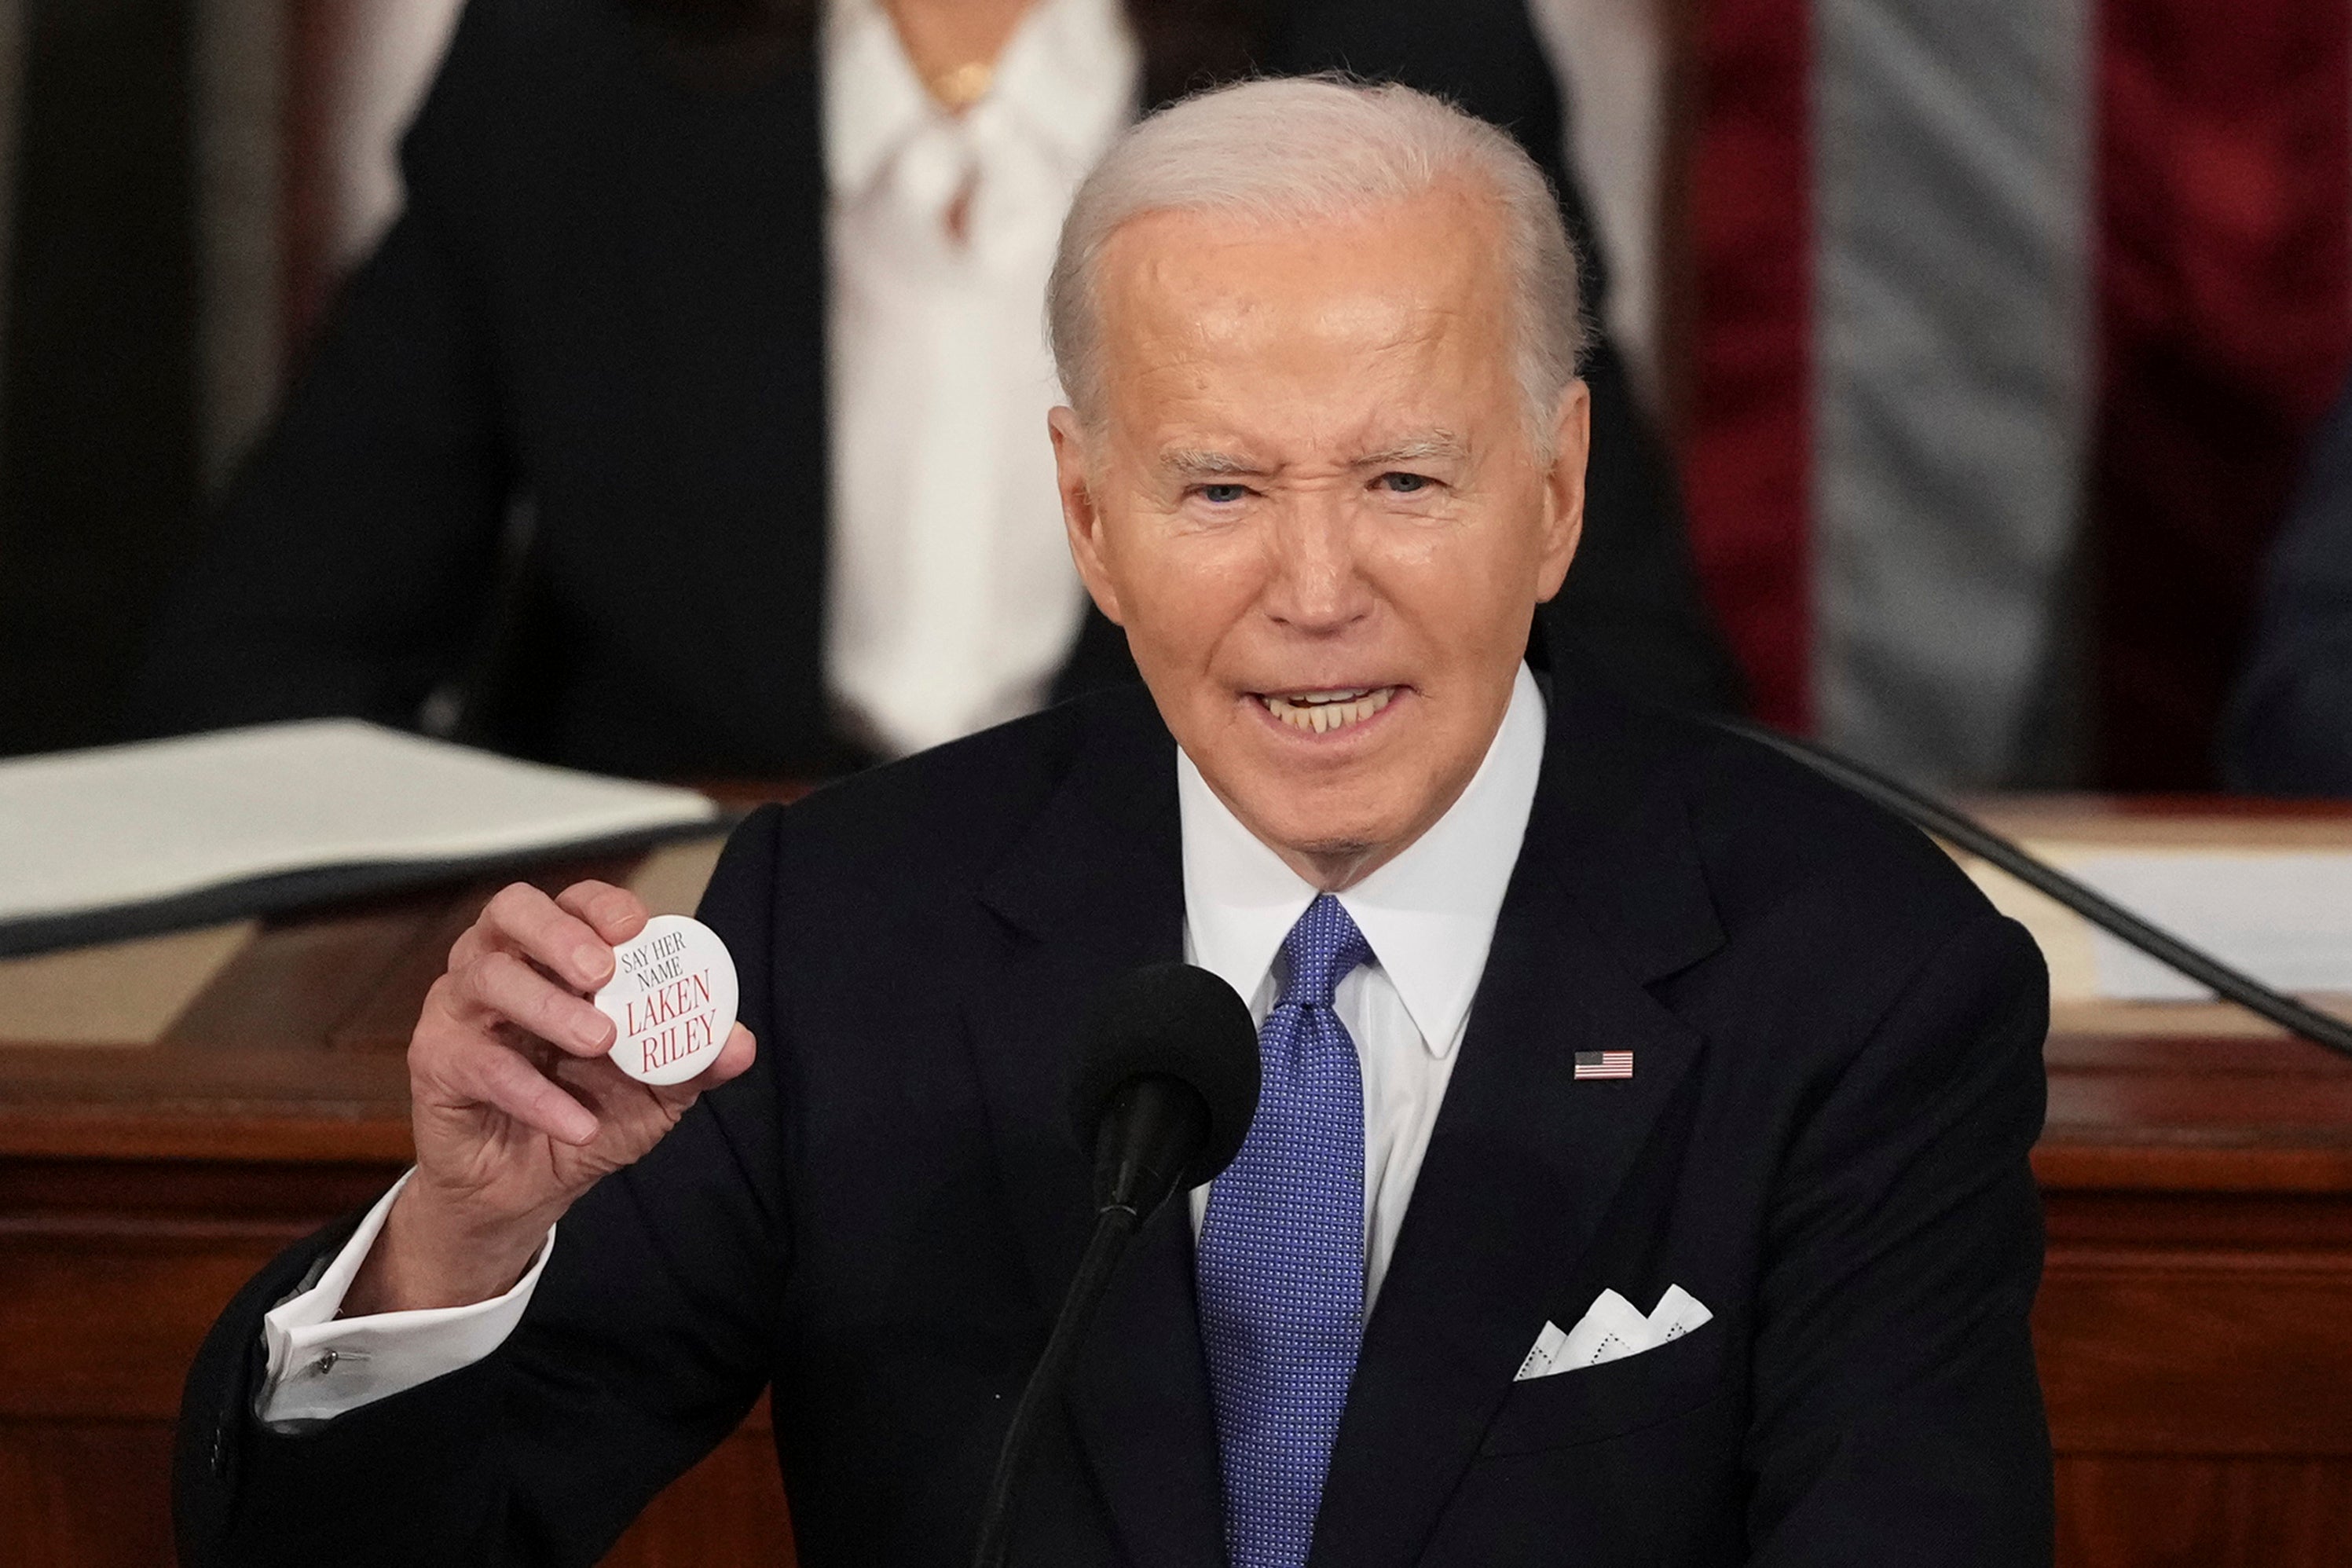 President Joe Biden holds up a pin bearing Laken Riley’s name during his State of the Union address